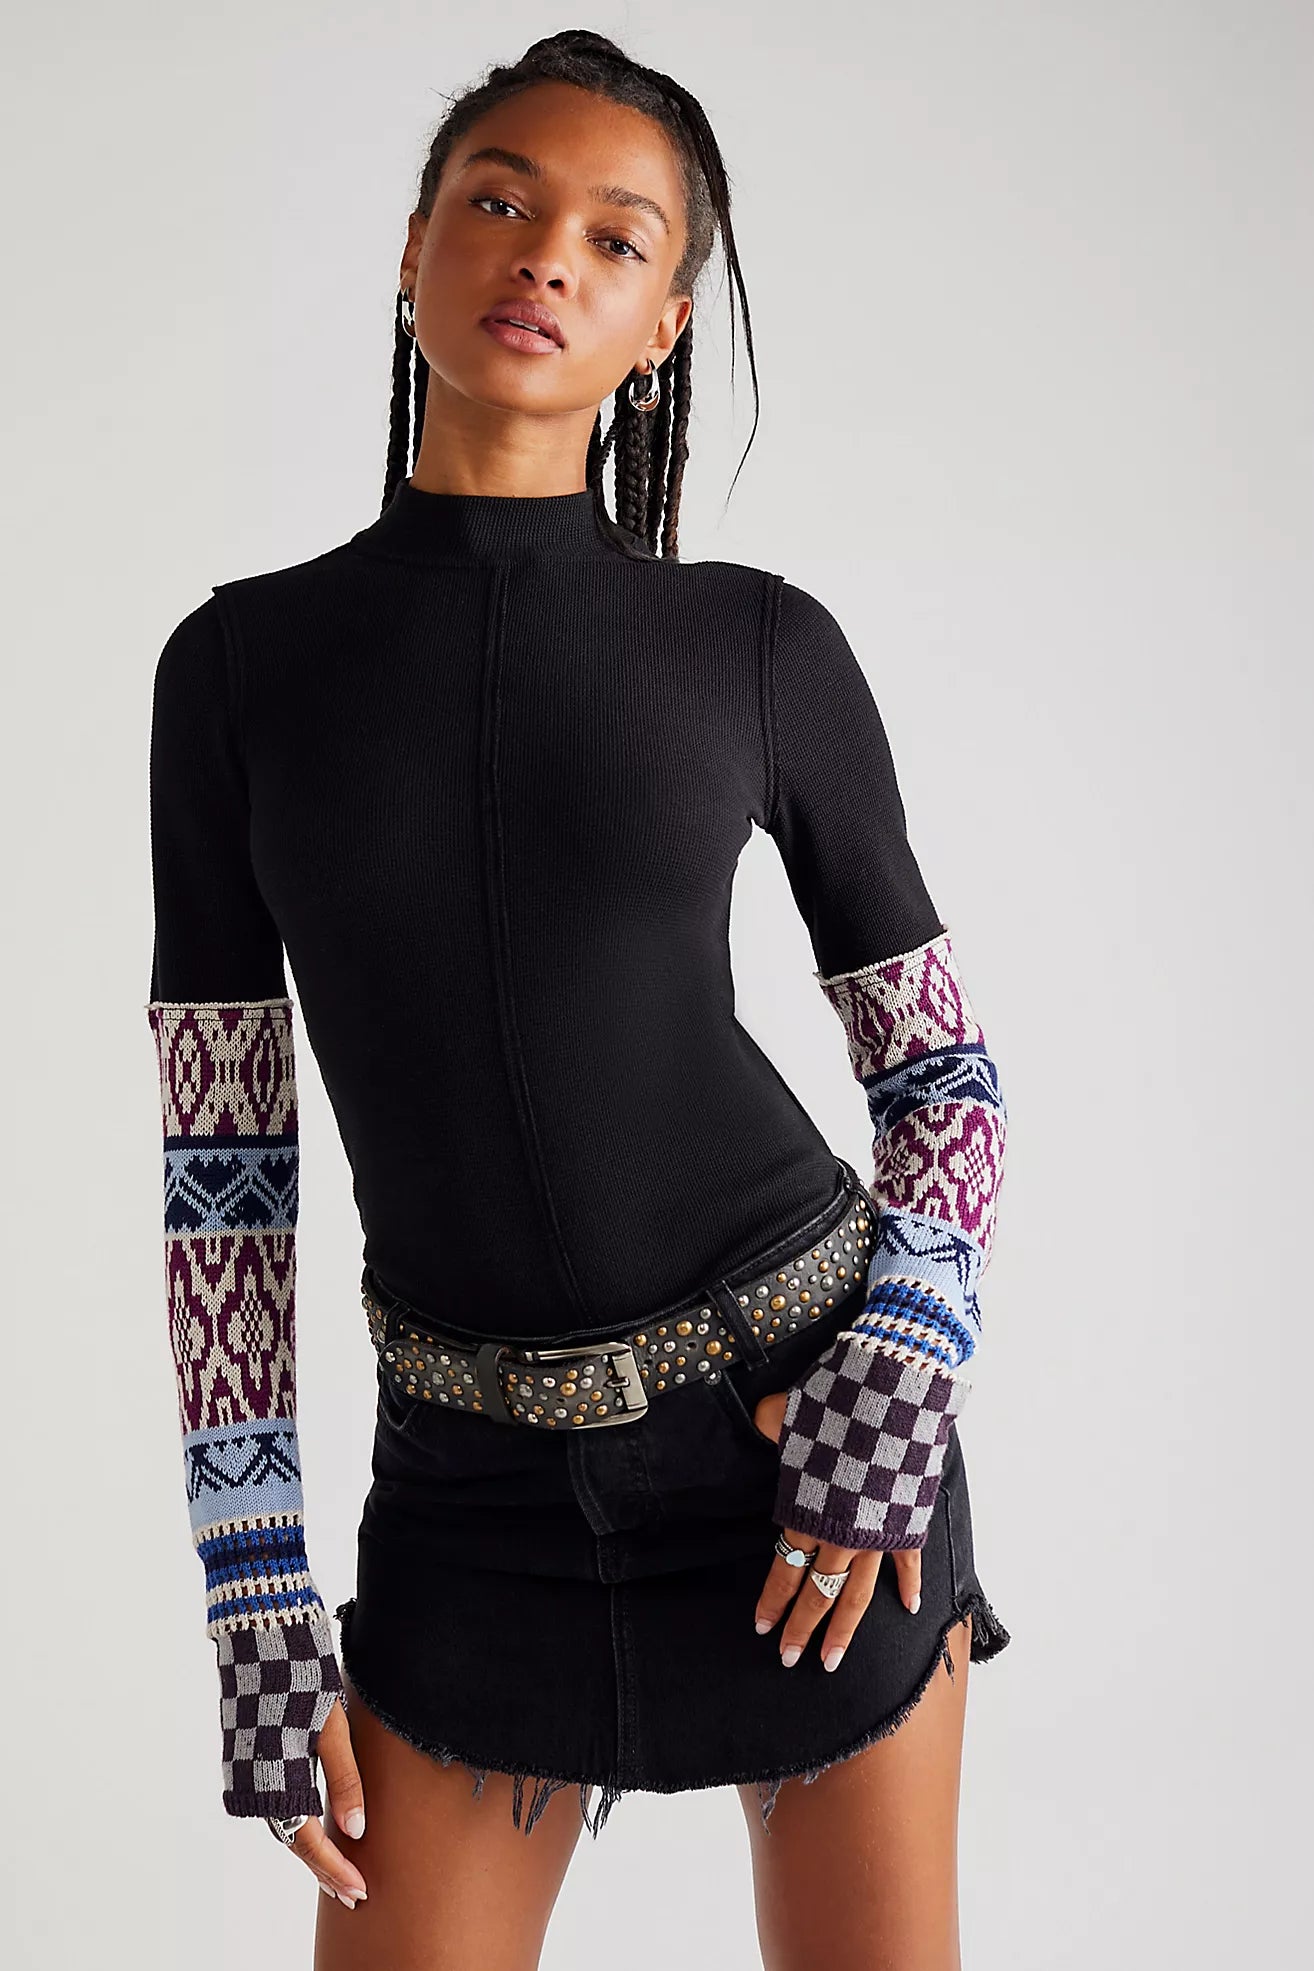 FREE PEOPLE GORGEOUS THERMAL CUFF SWEATER